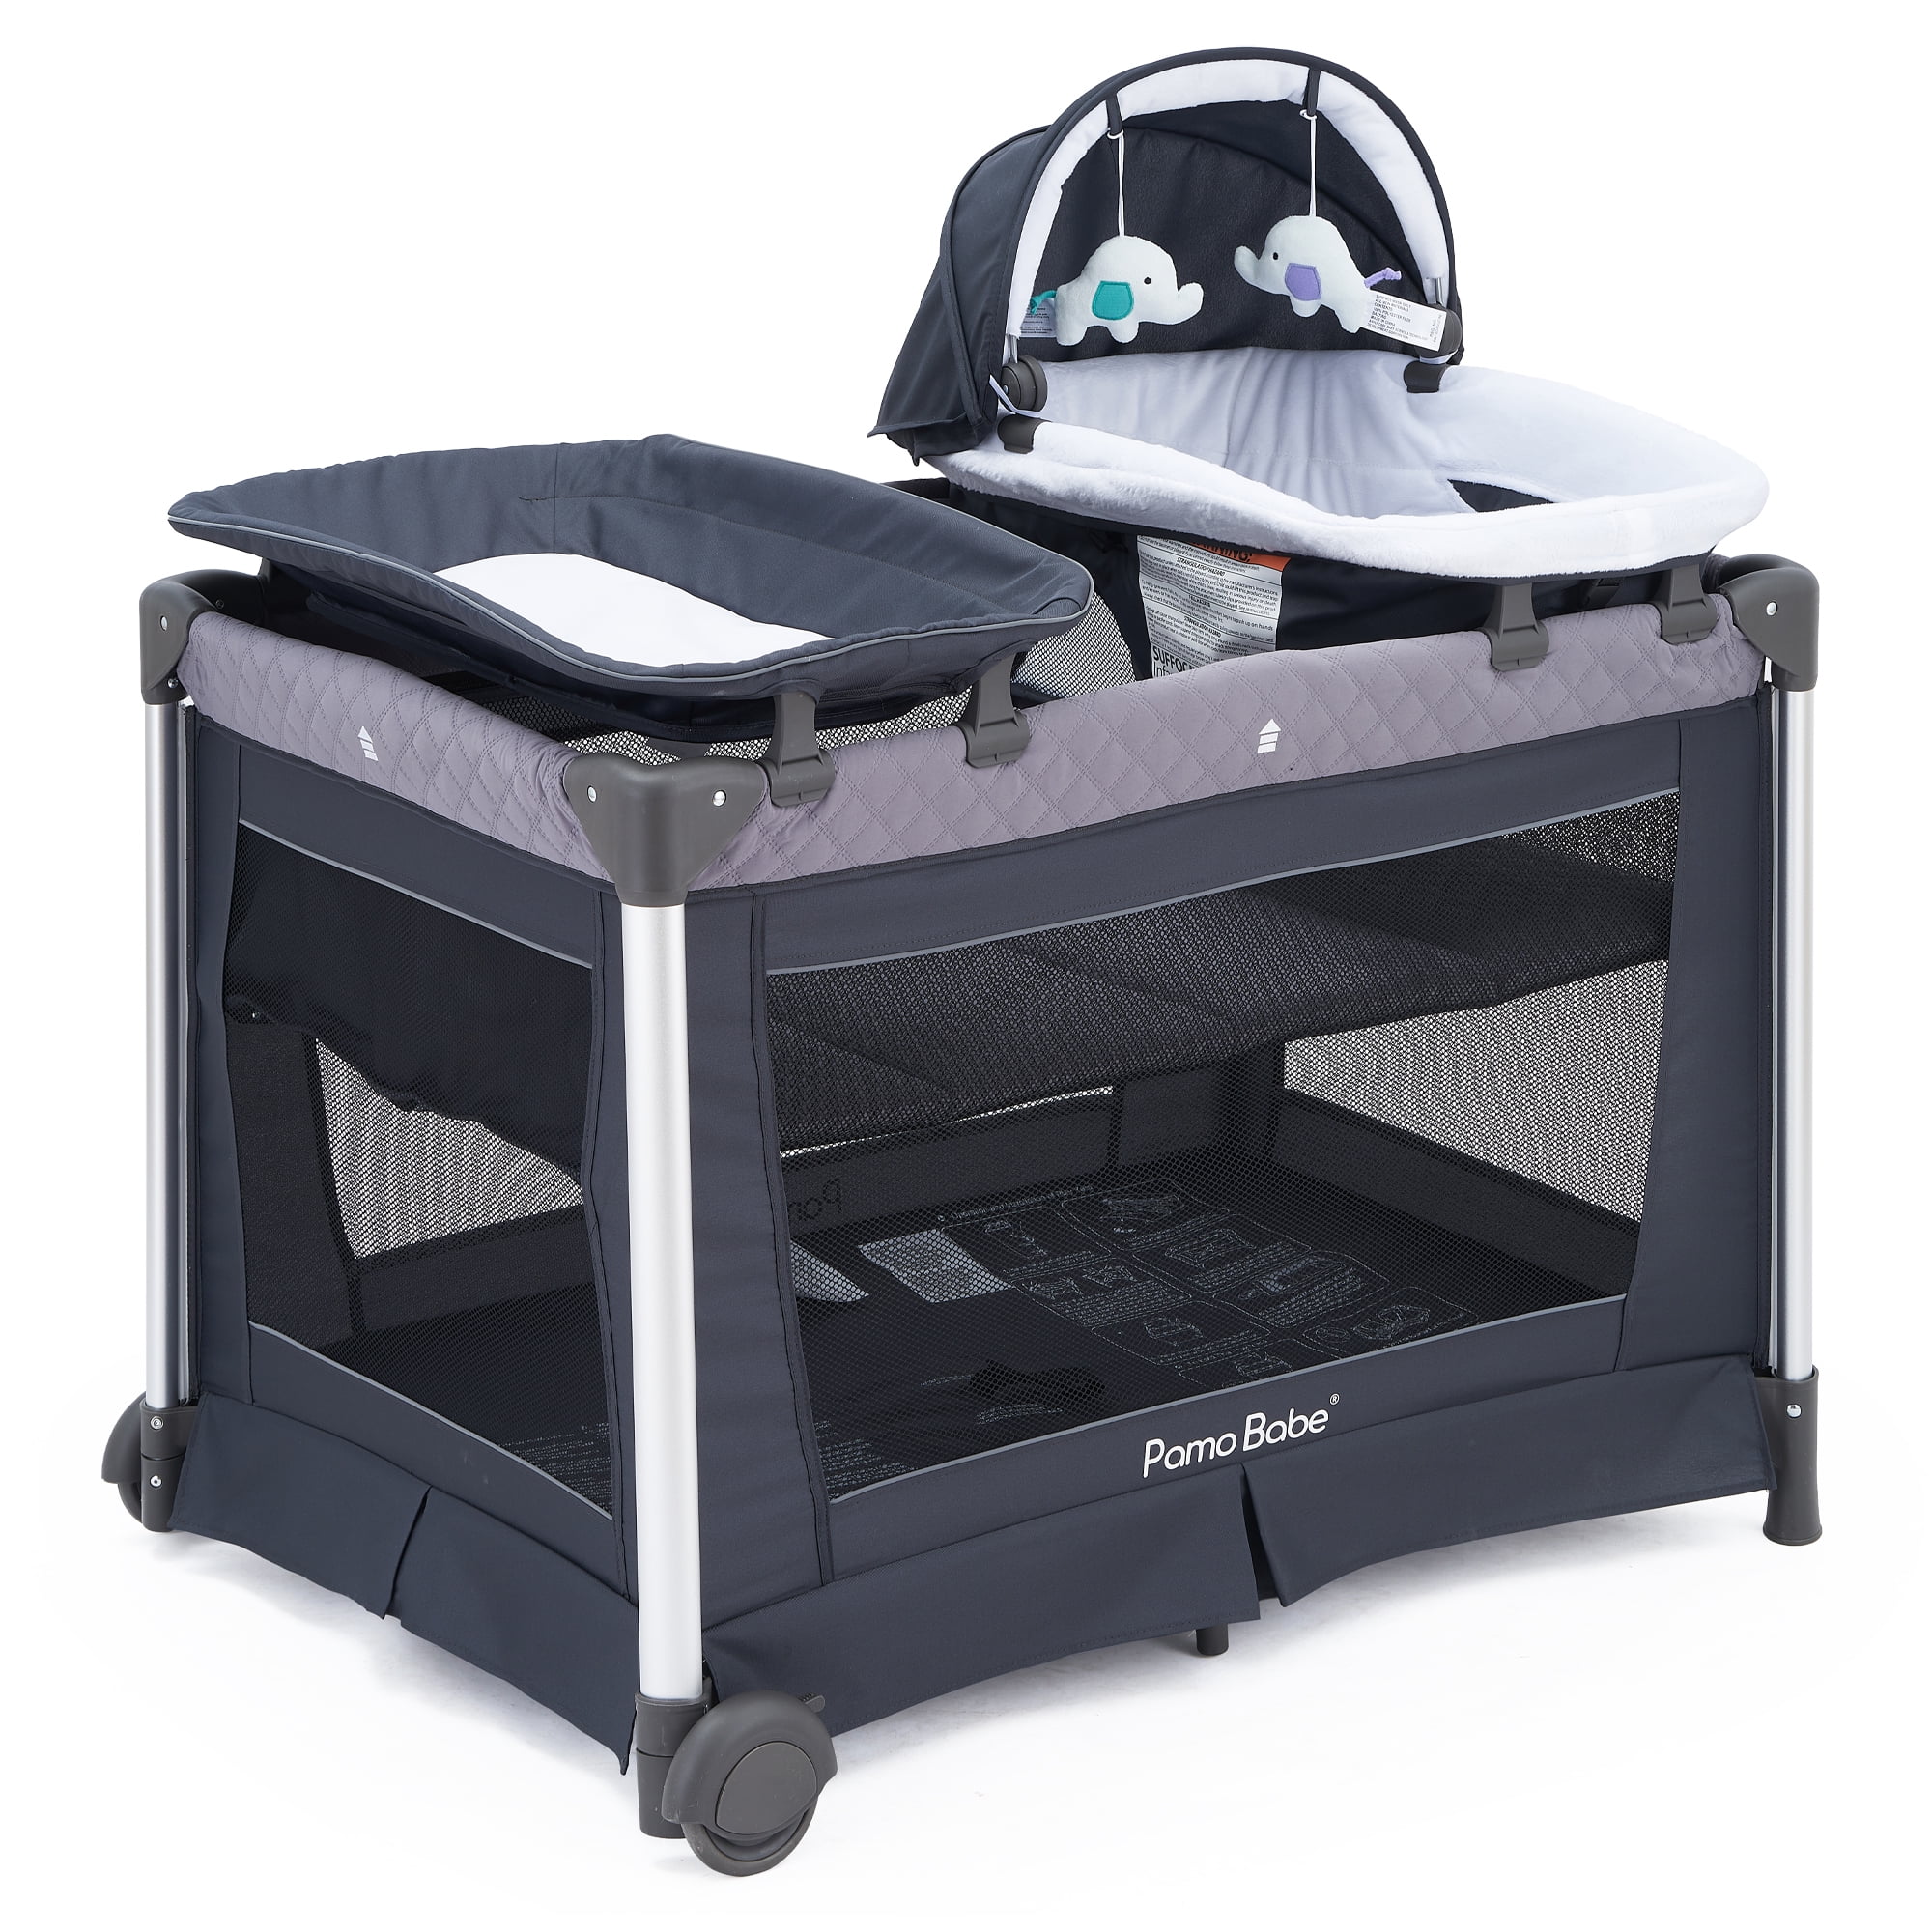 Reviews for FUFU&GAGA Gray Multifunctional Foldable Baby Crib Co-sleeper  Playpen Adjustable Infant Bassinet Bed with Carry Bag Hanging Toys